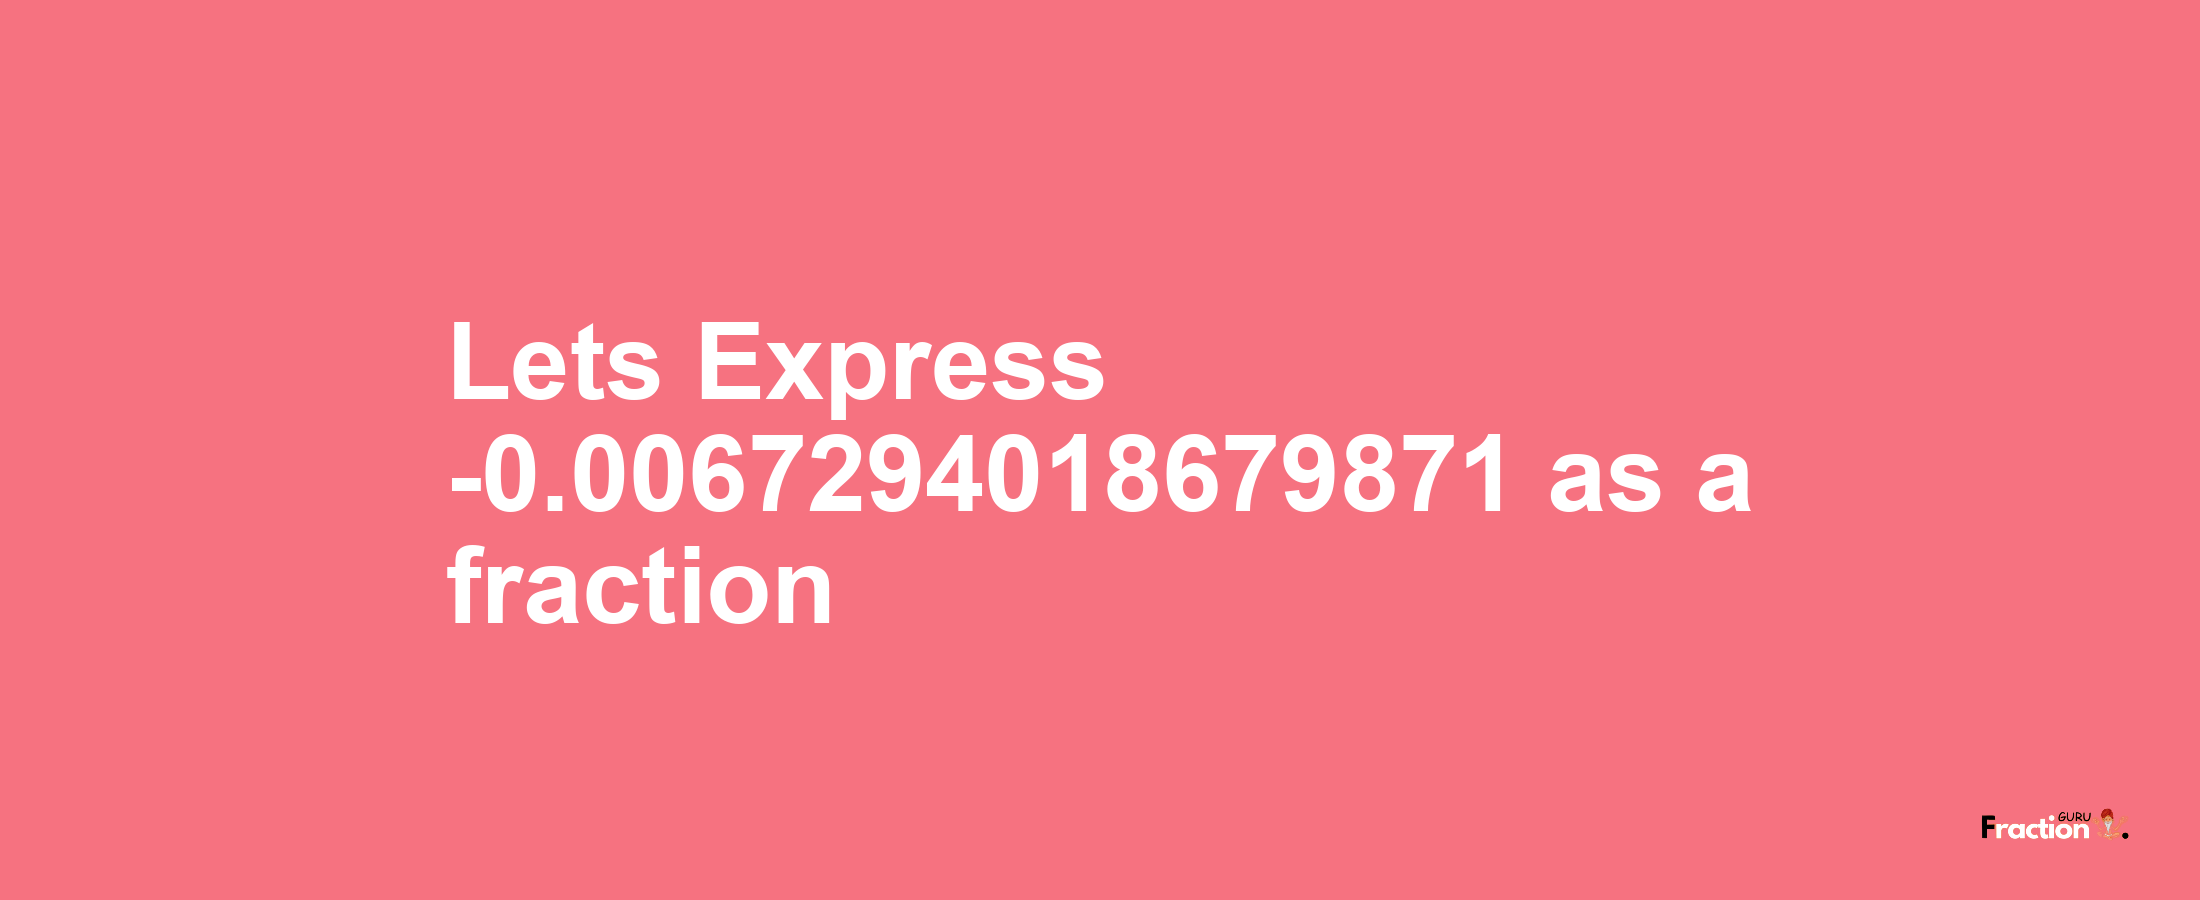 Lets Express -0.0067294018679871 as afraction